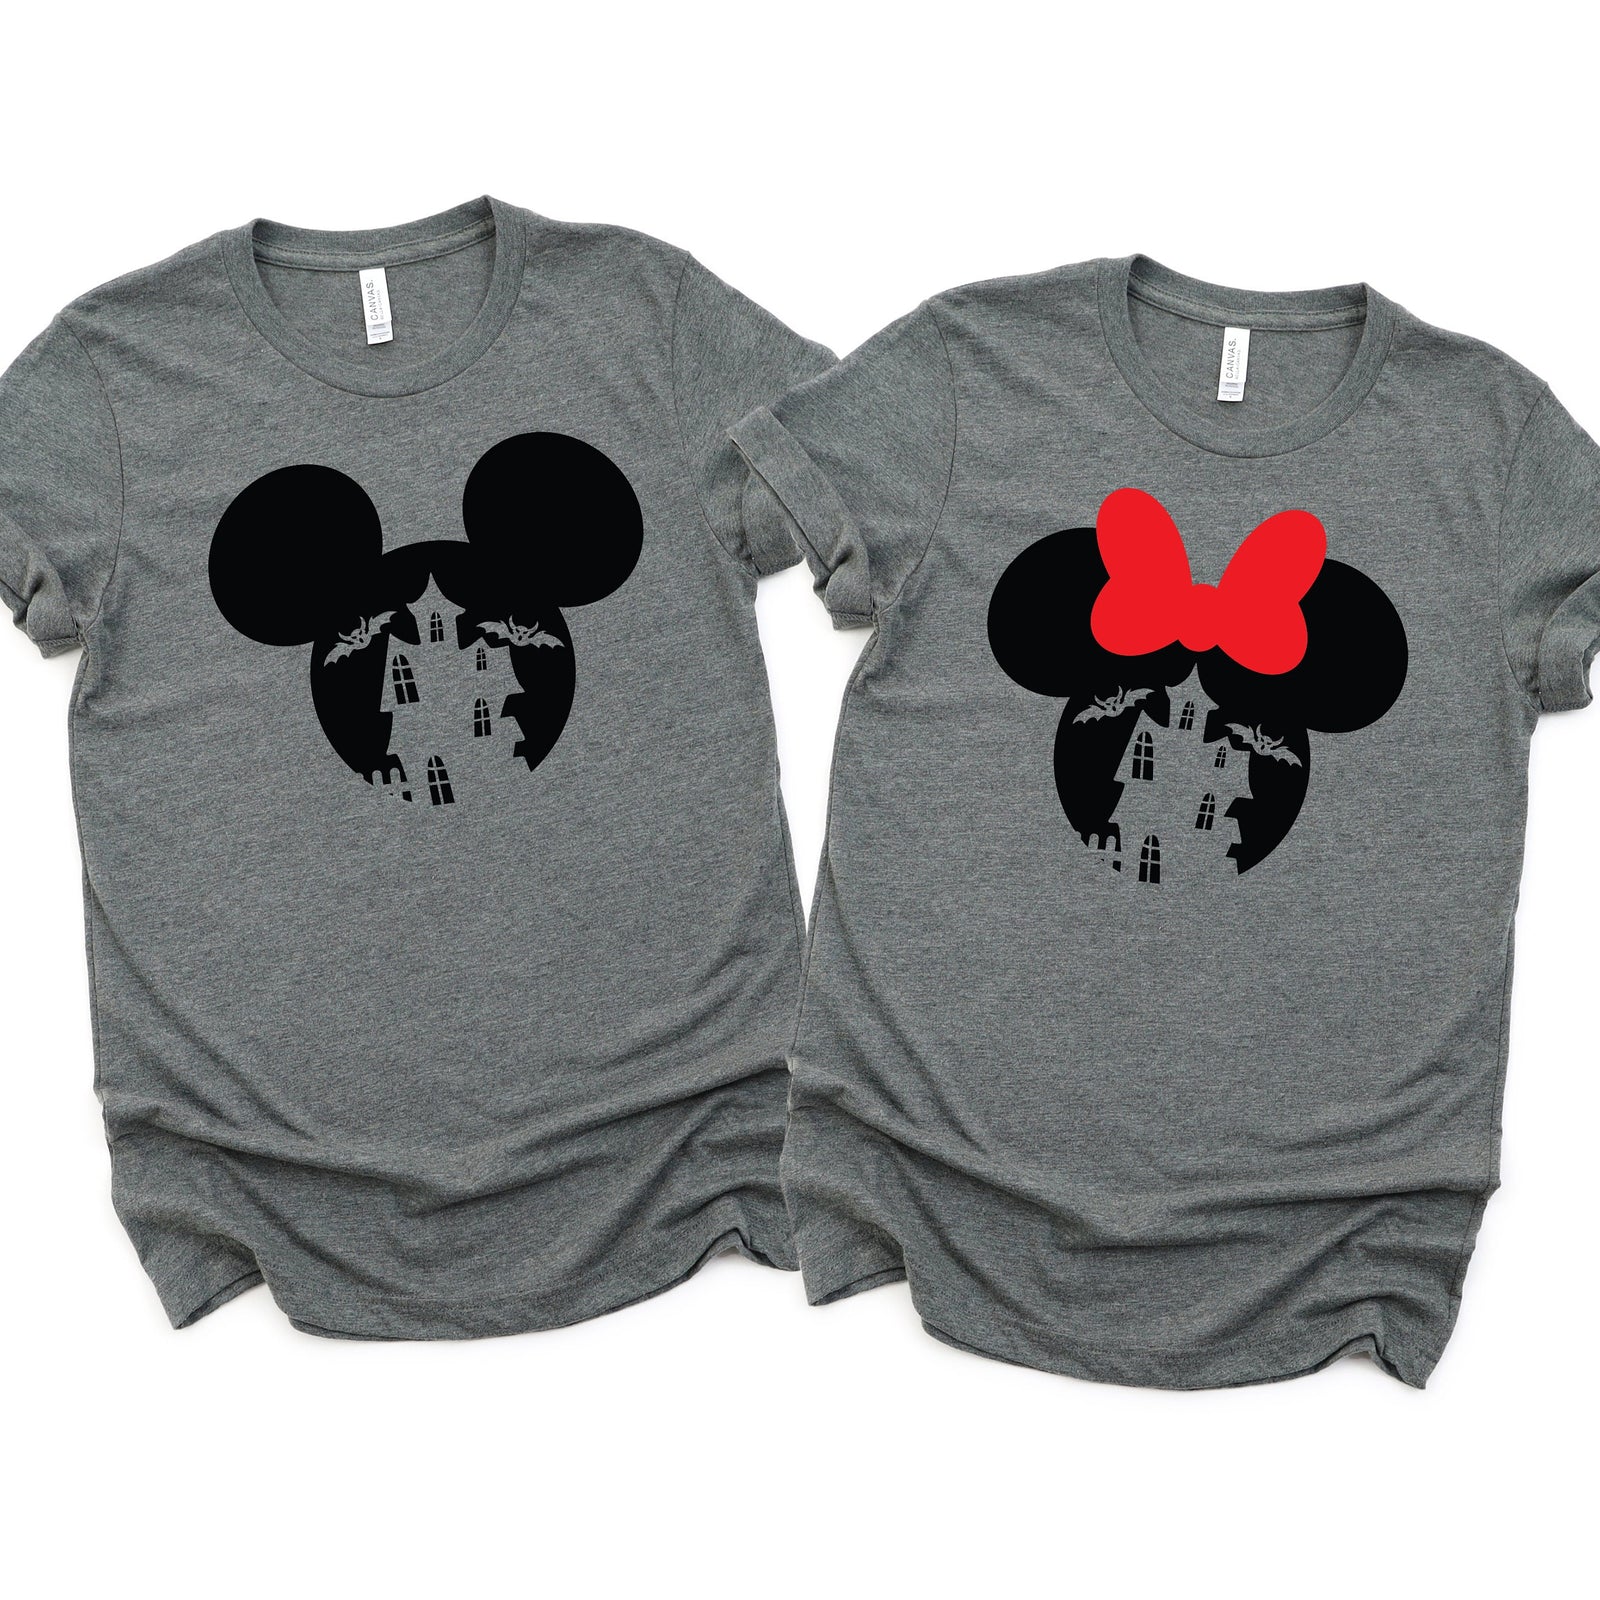 Halloween Minnie and Mickey Shirts - Disney Couples - Matching Shirts - Haunted Mansion